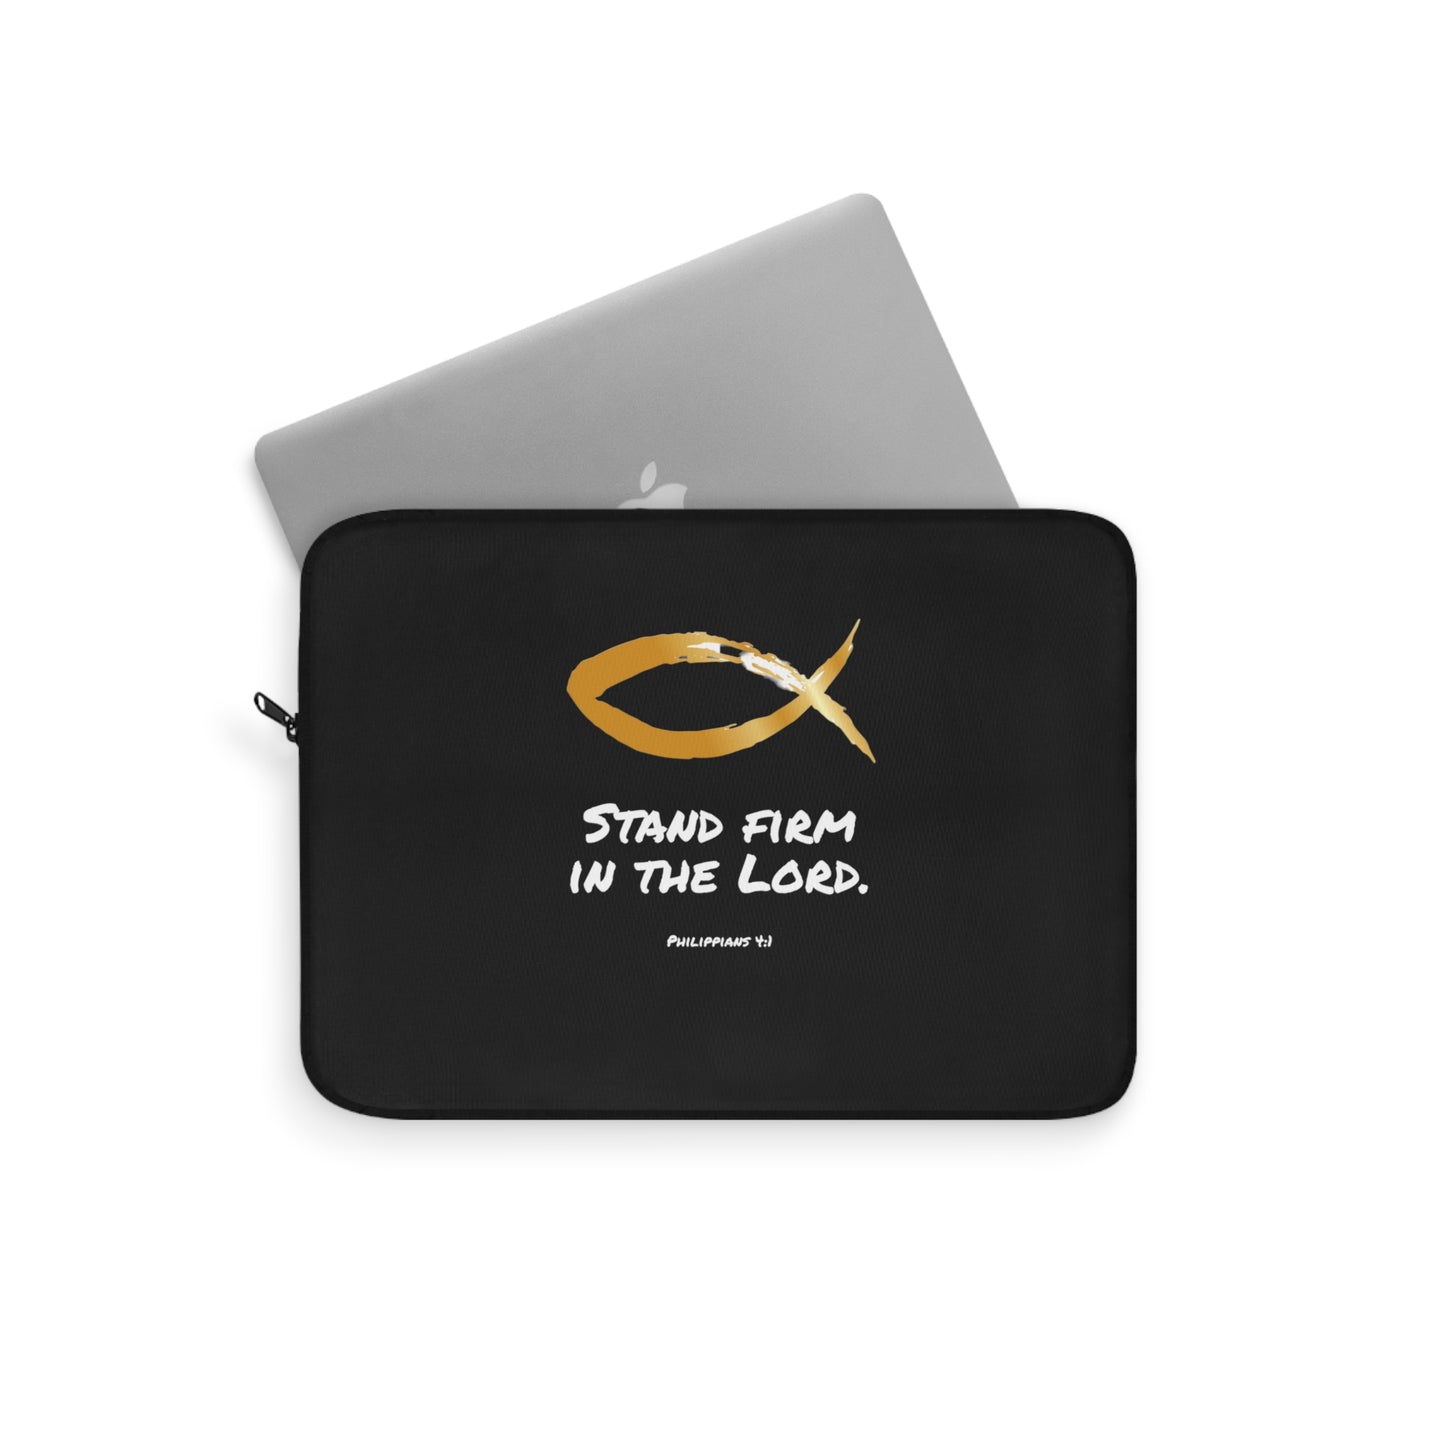 Laptop Sleeve - Stand Firm in the Lord